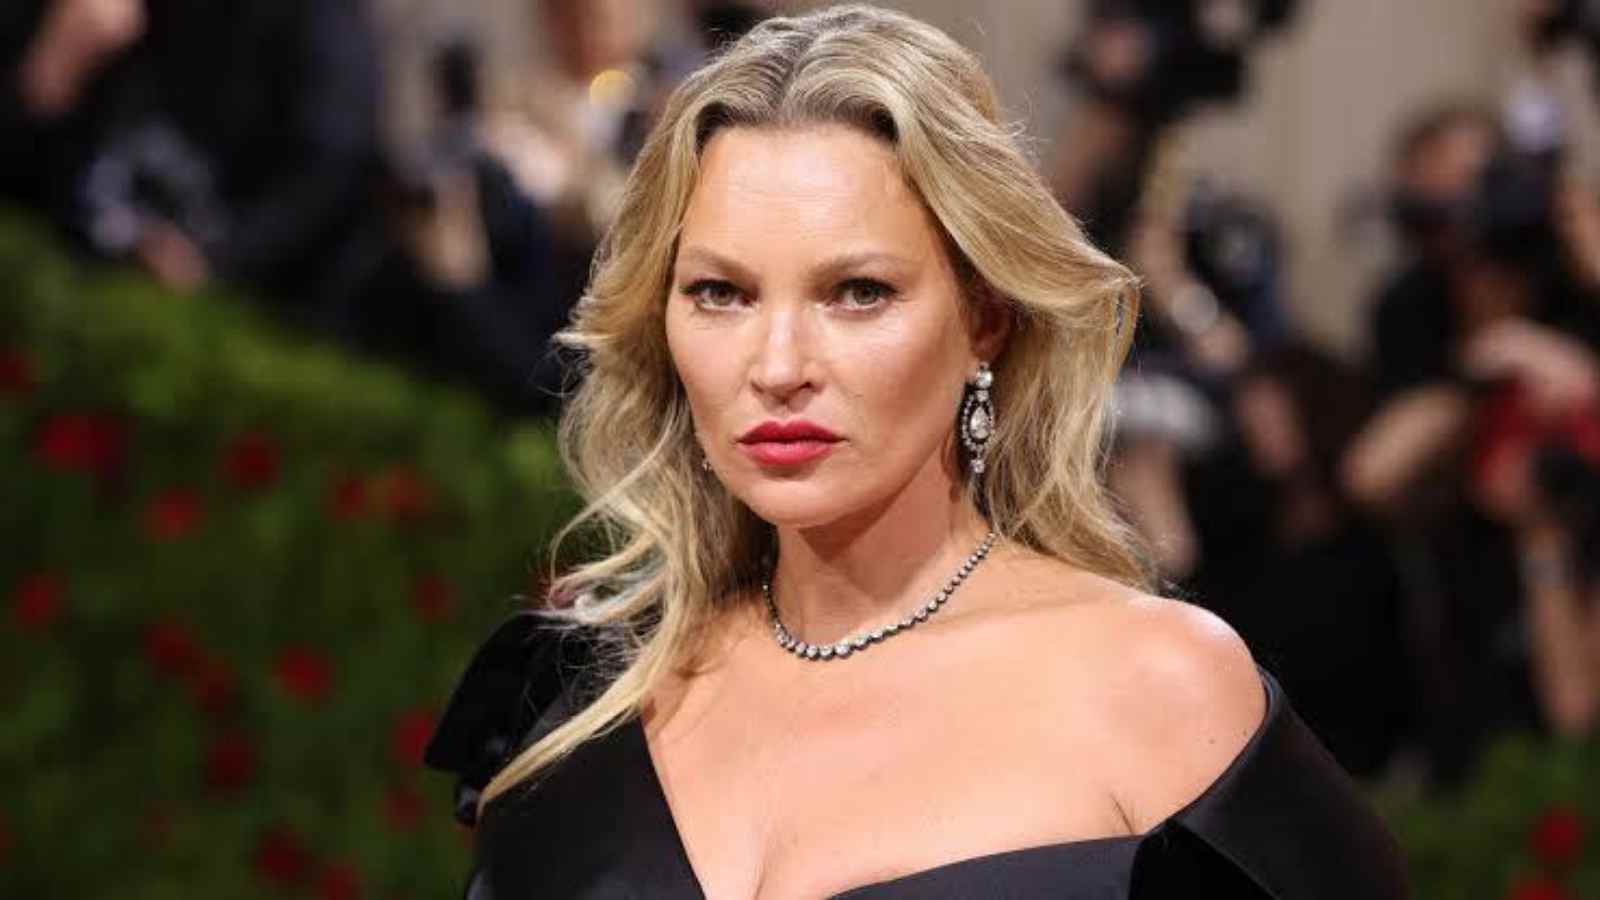 Kate Moss clears the rumour about Depp pushing her from a flight of stairs 